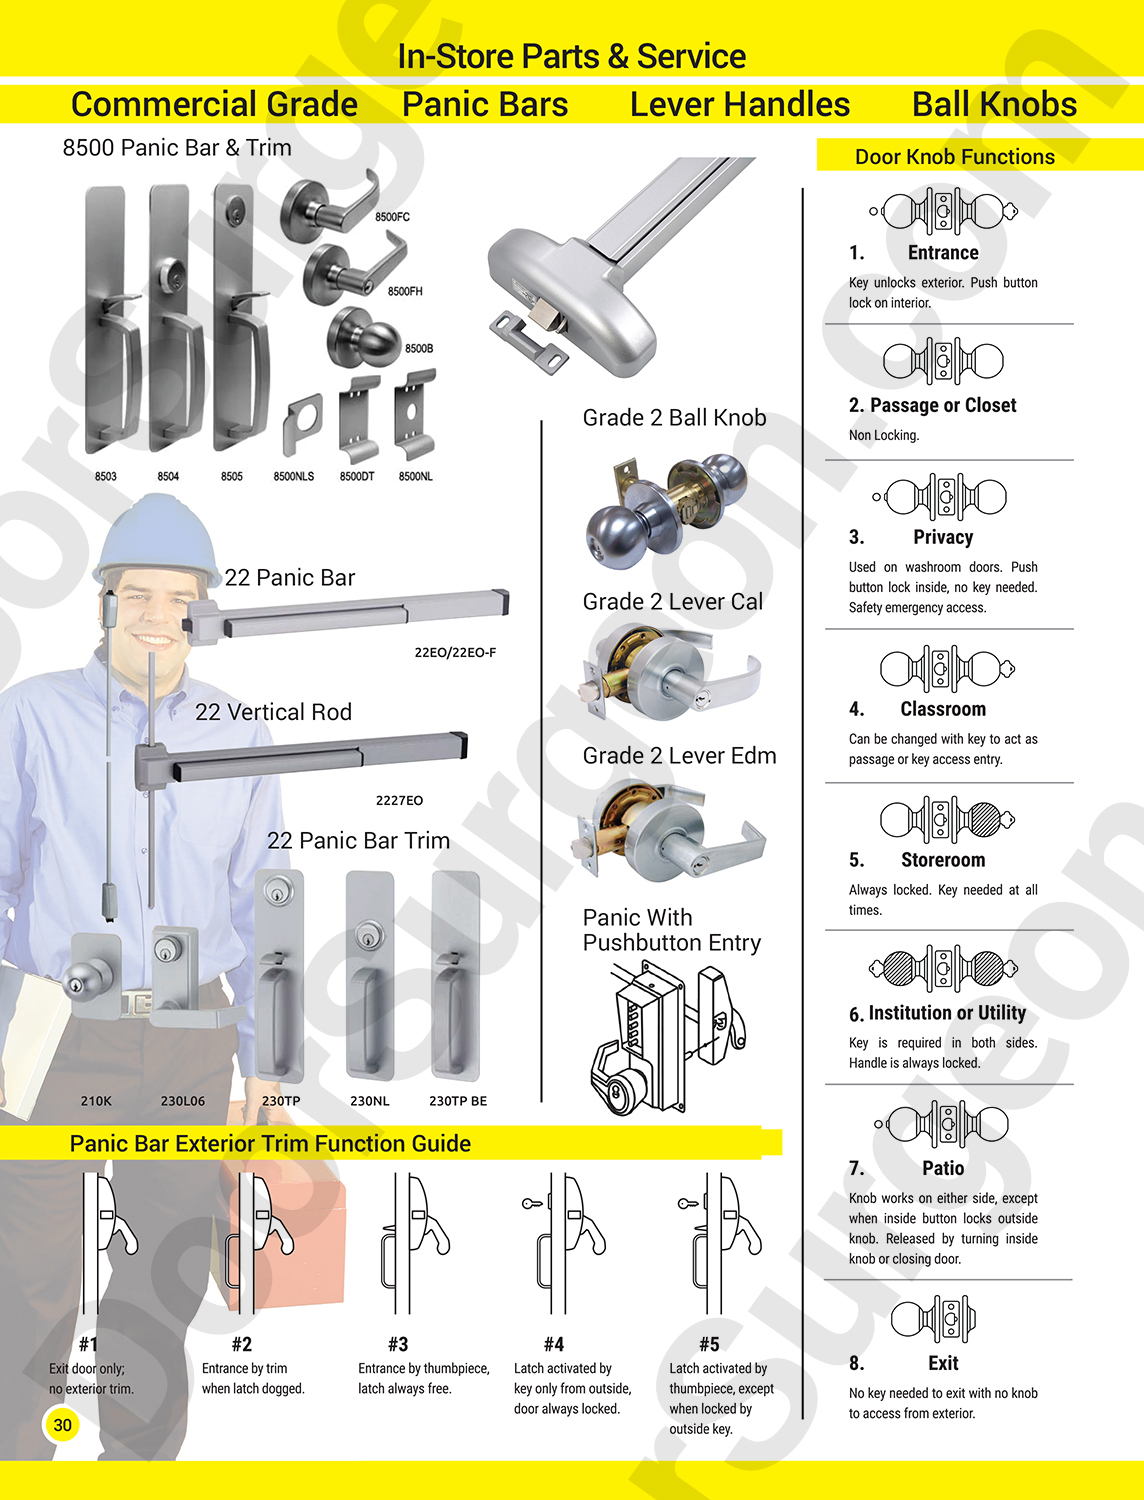 Grade 1 panic bars lever handles ball knobs in stock parts & staffed trained locksmith technicians.